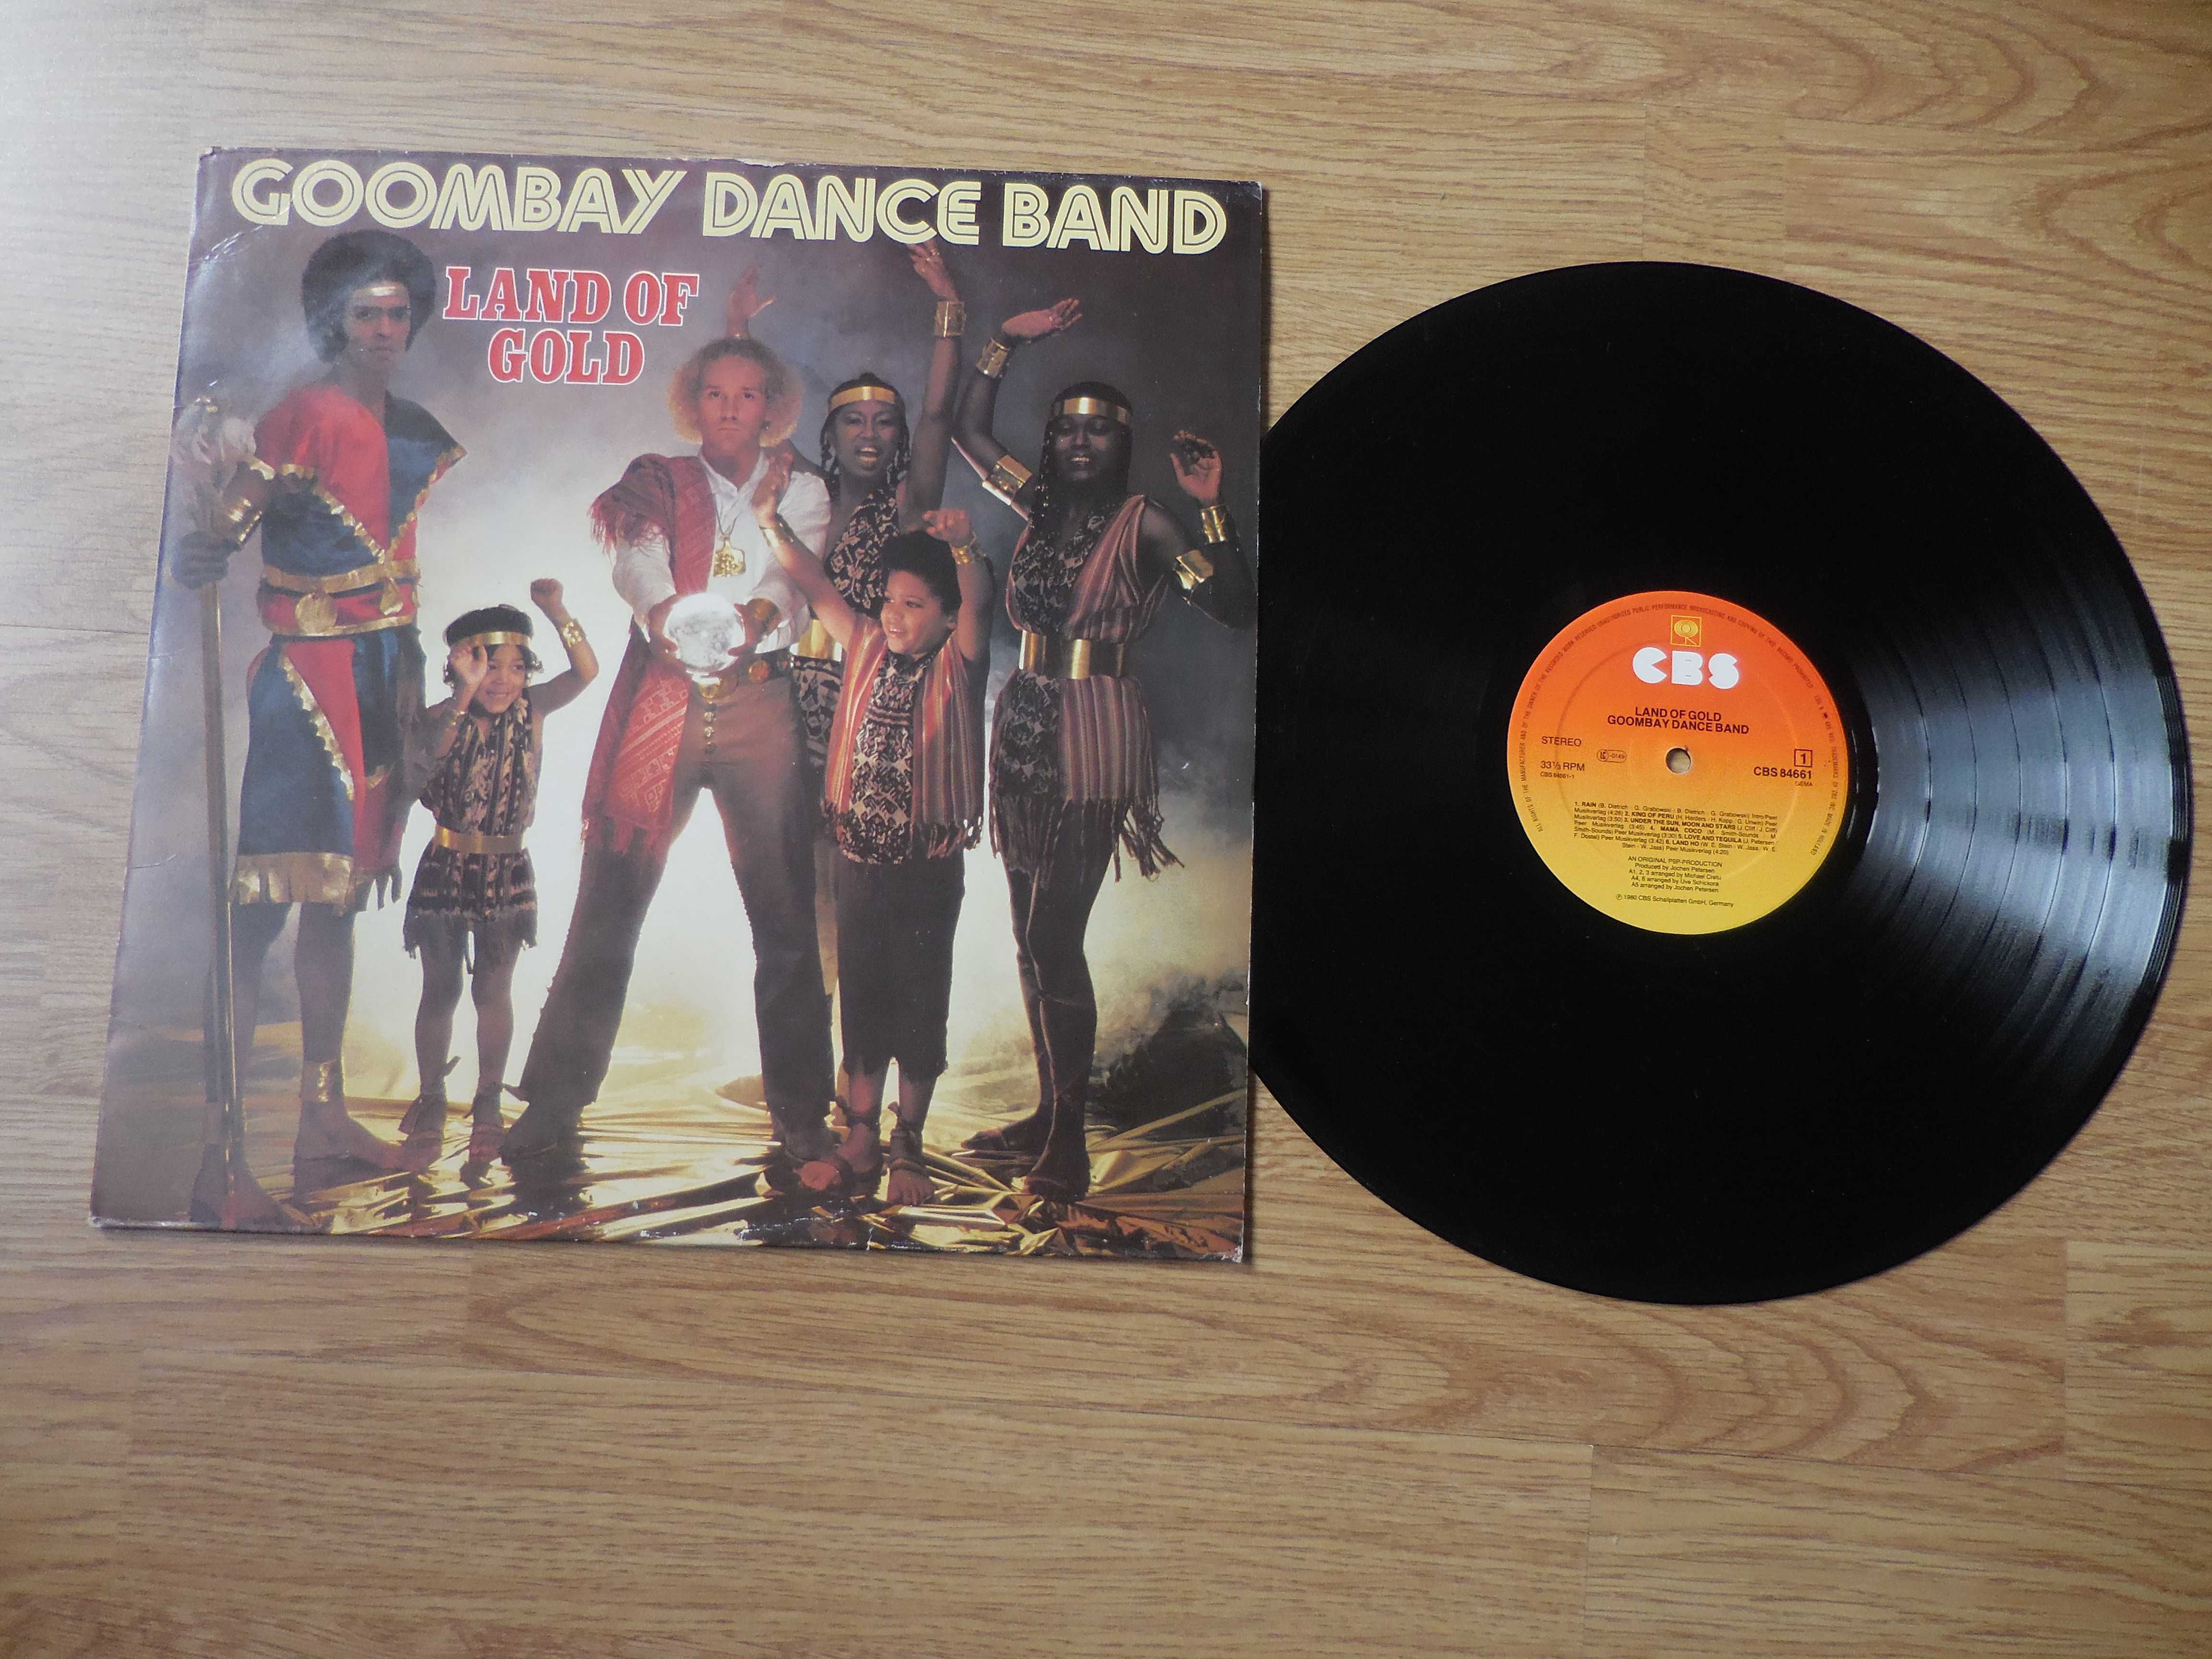 Goombay Dance Band 'Land of gold'